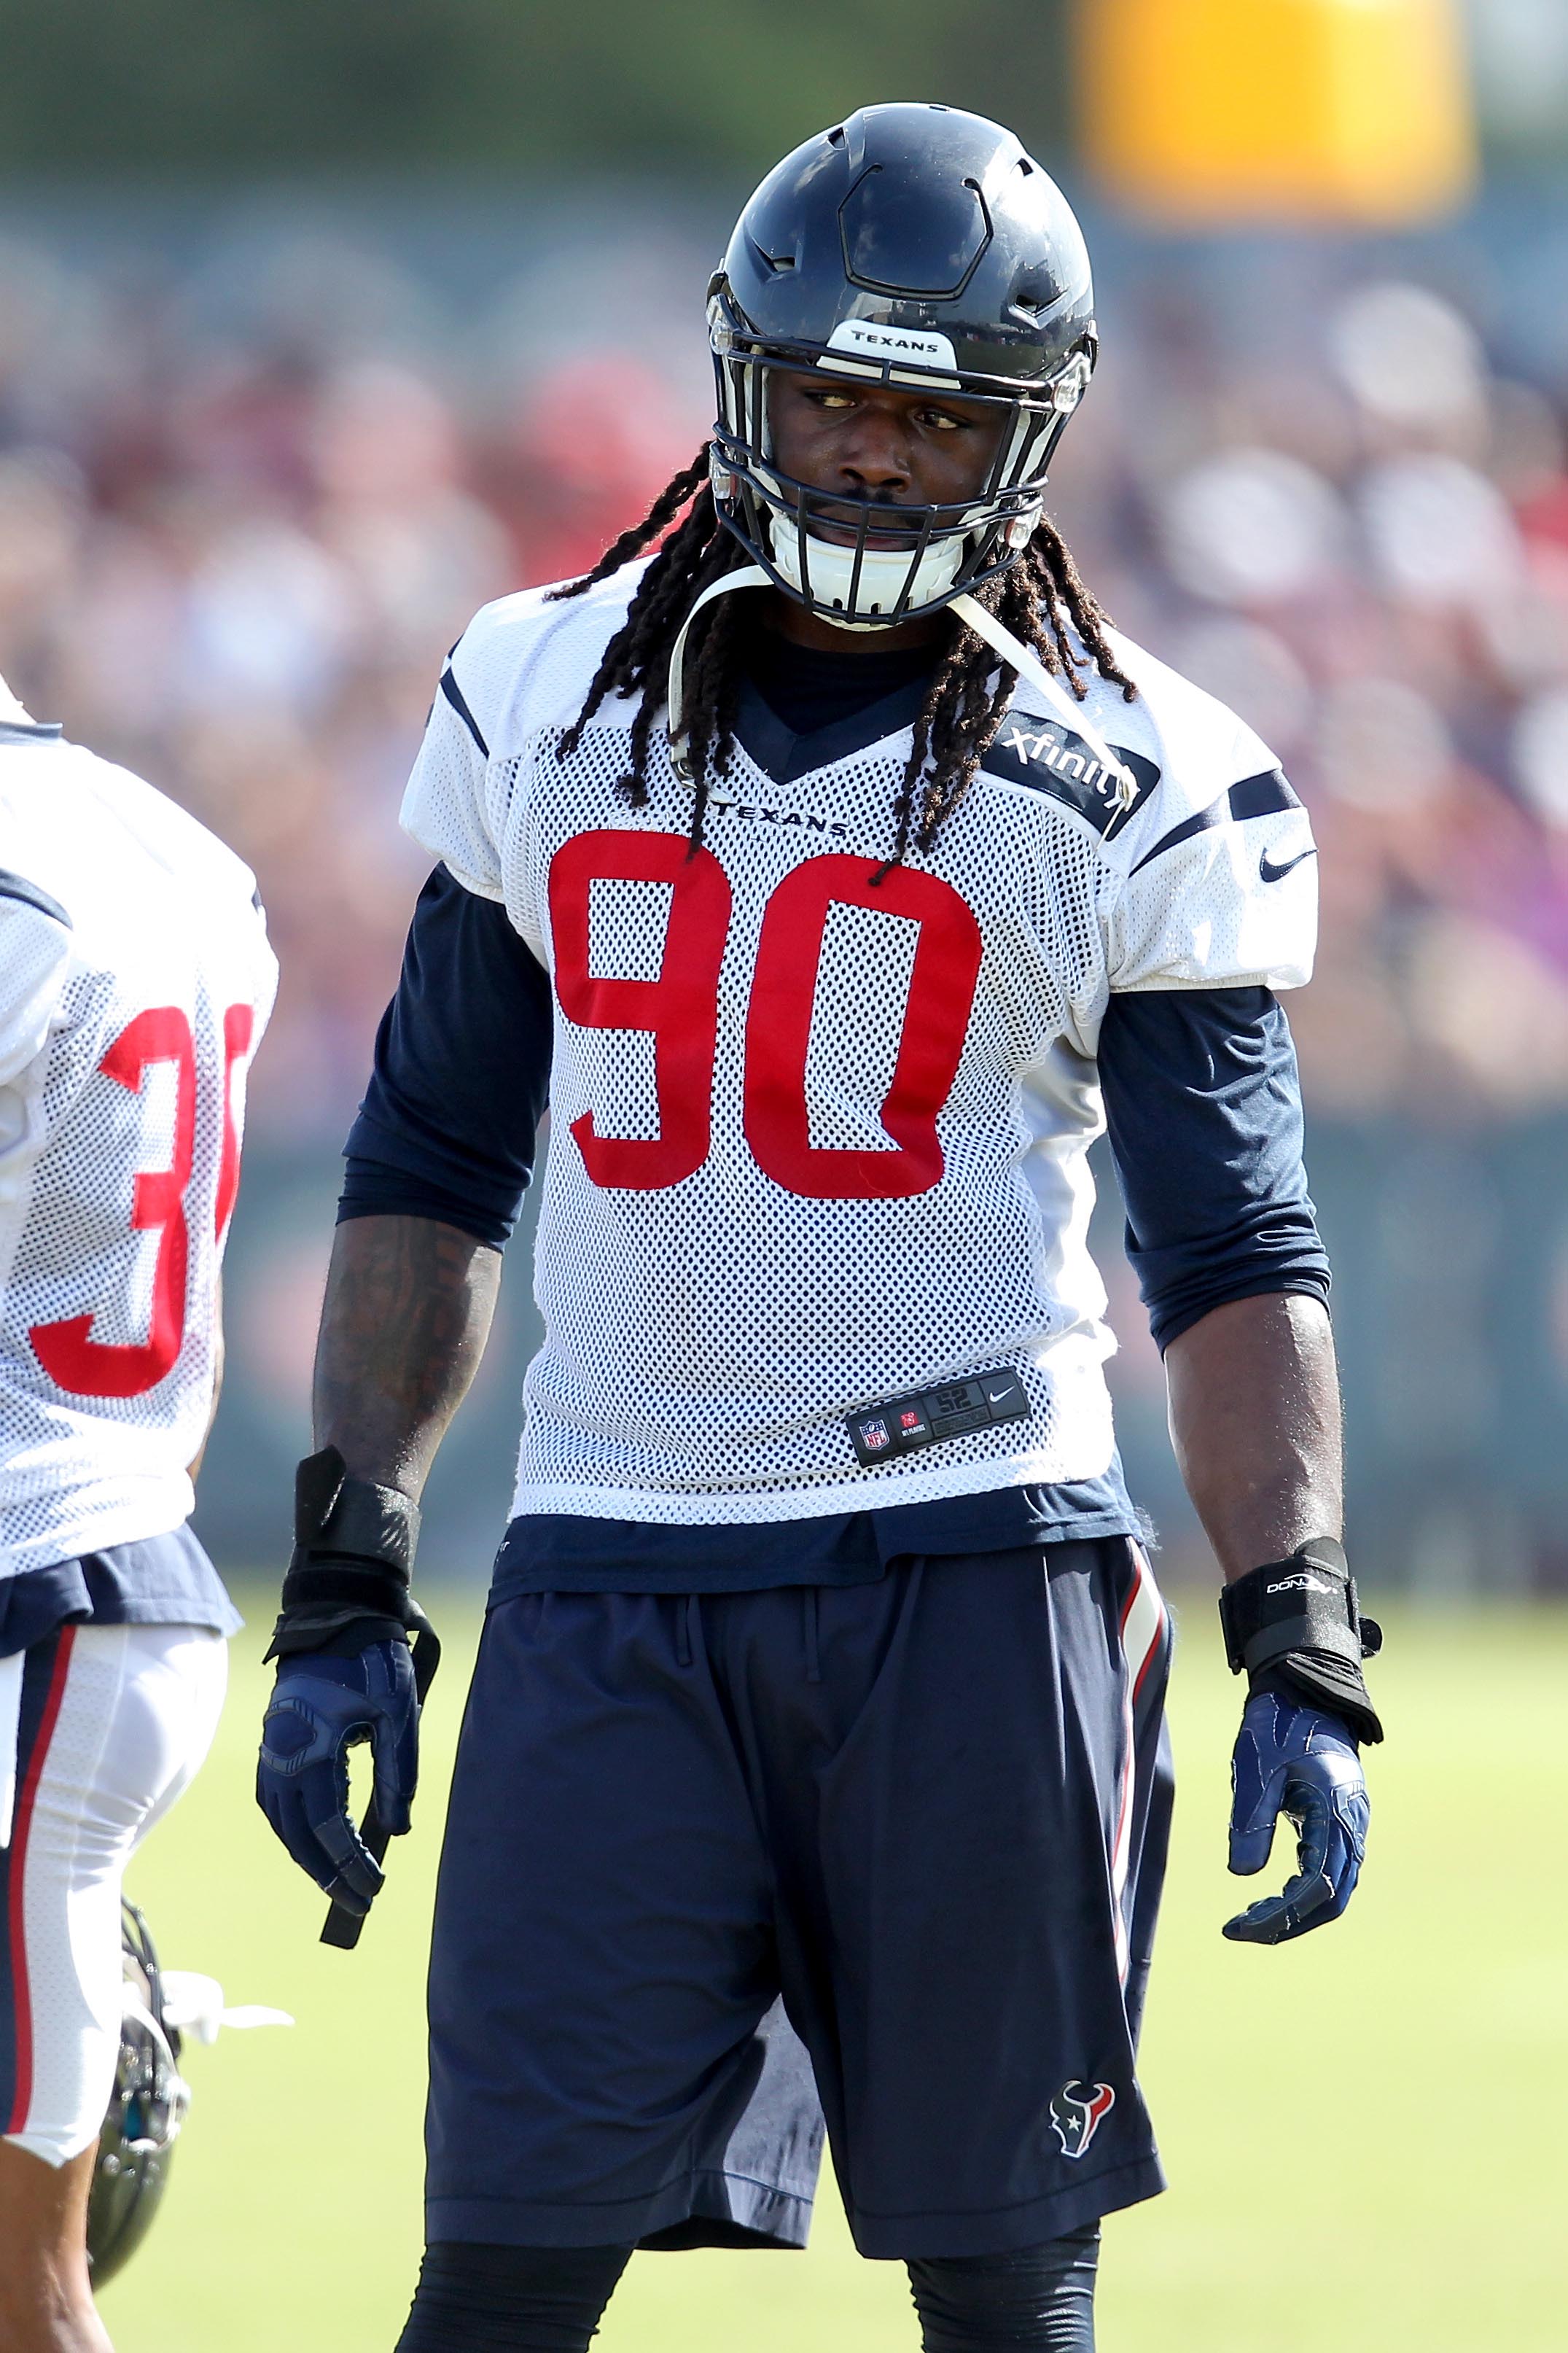 Don't you forget...Clowney's comin'.